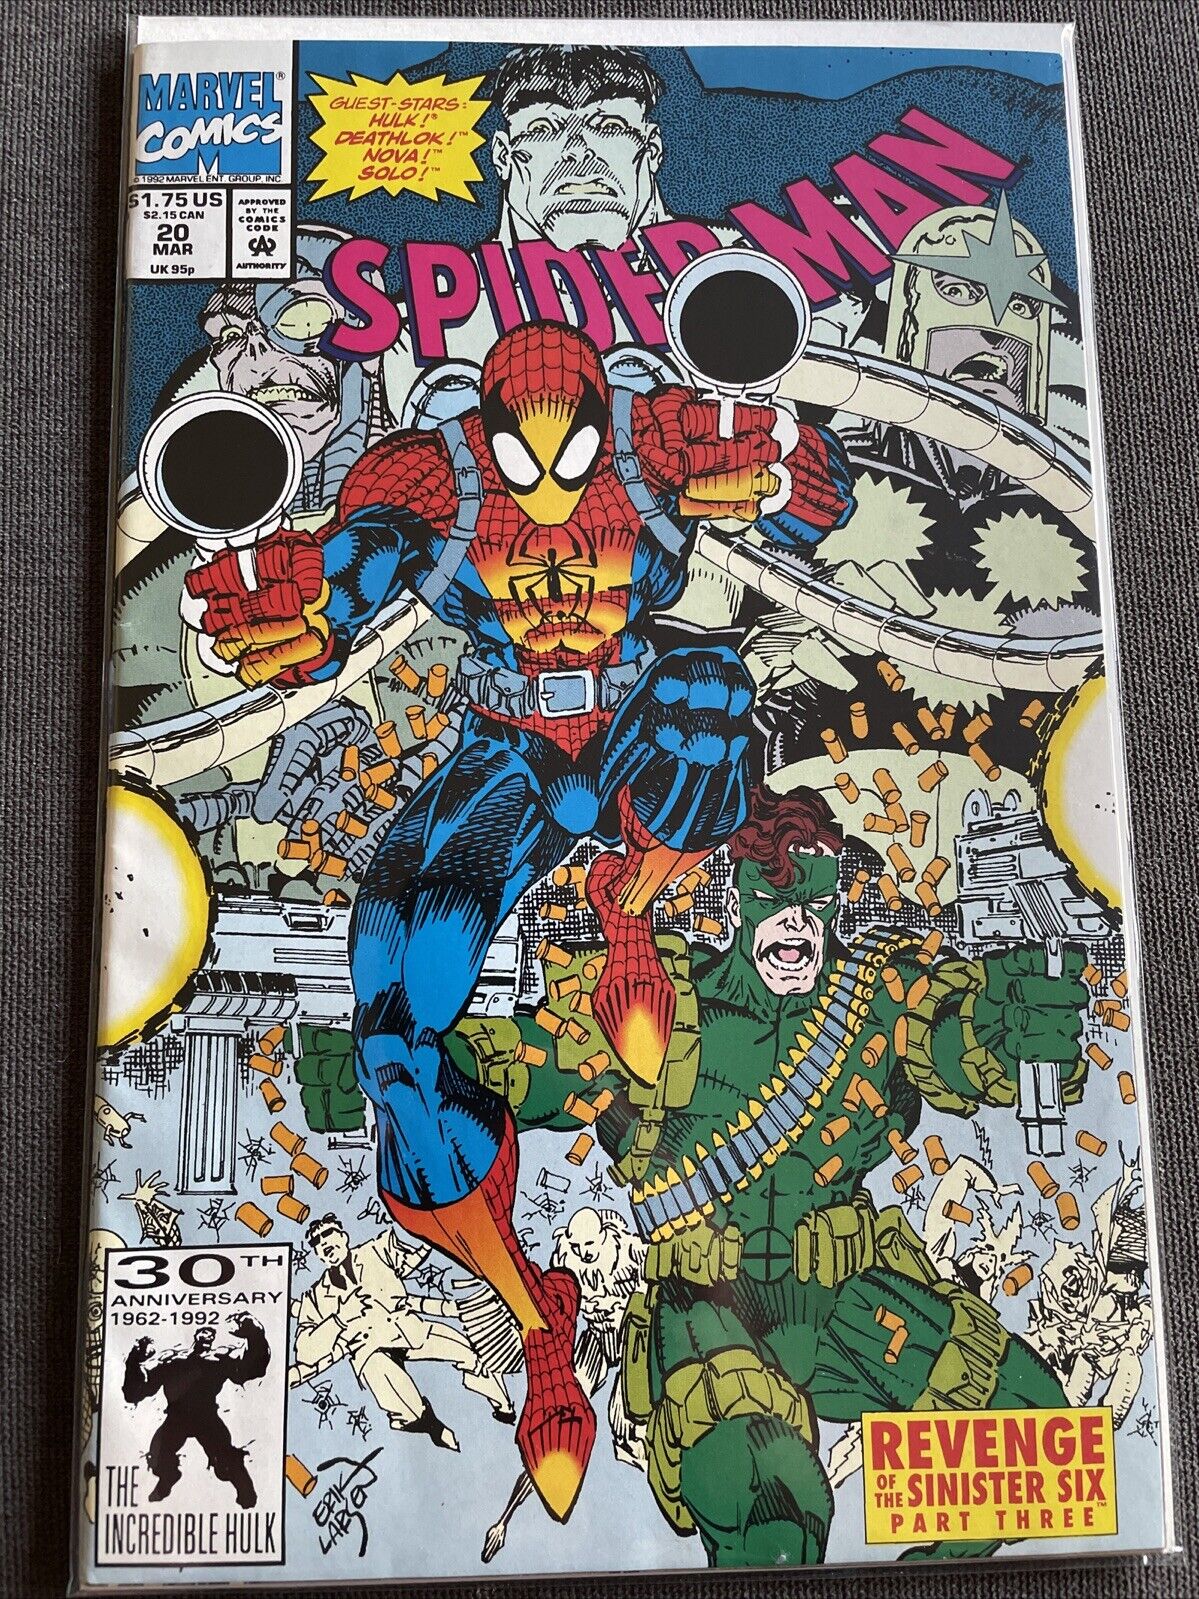 Marvel - SPIDER-MAN #20 (Great Condition) bagged and boarded